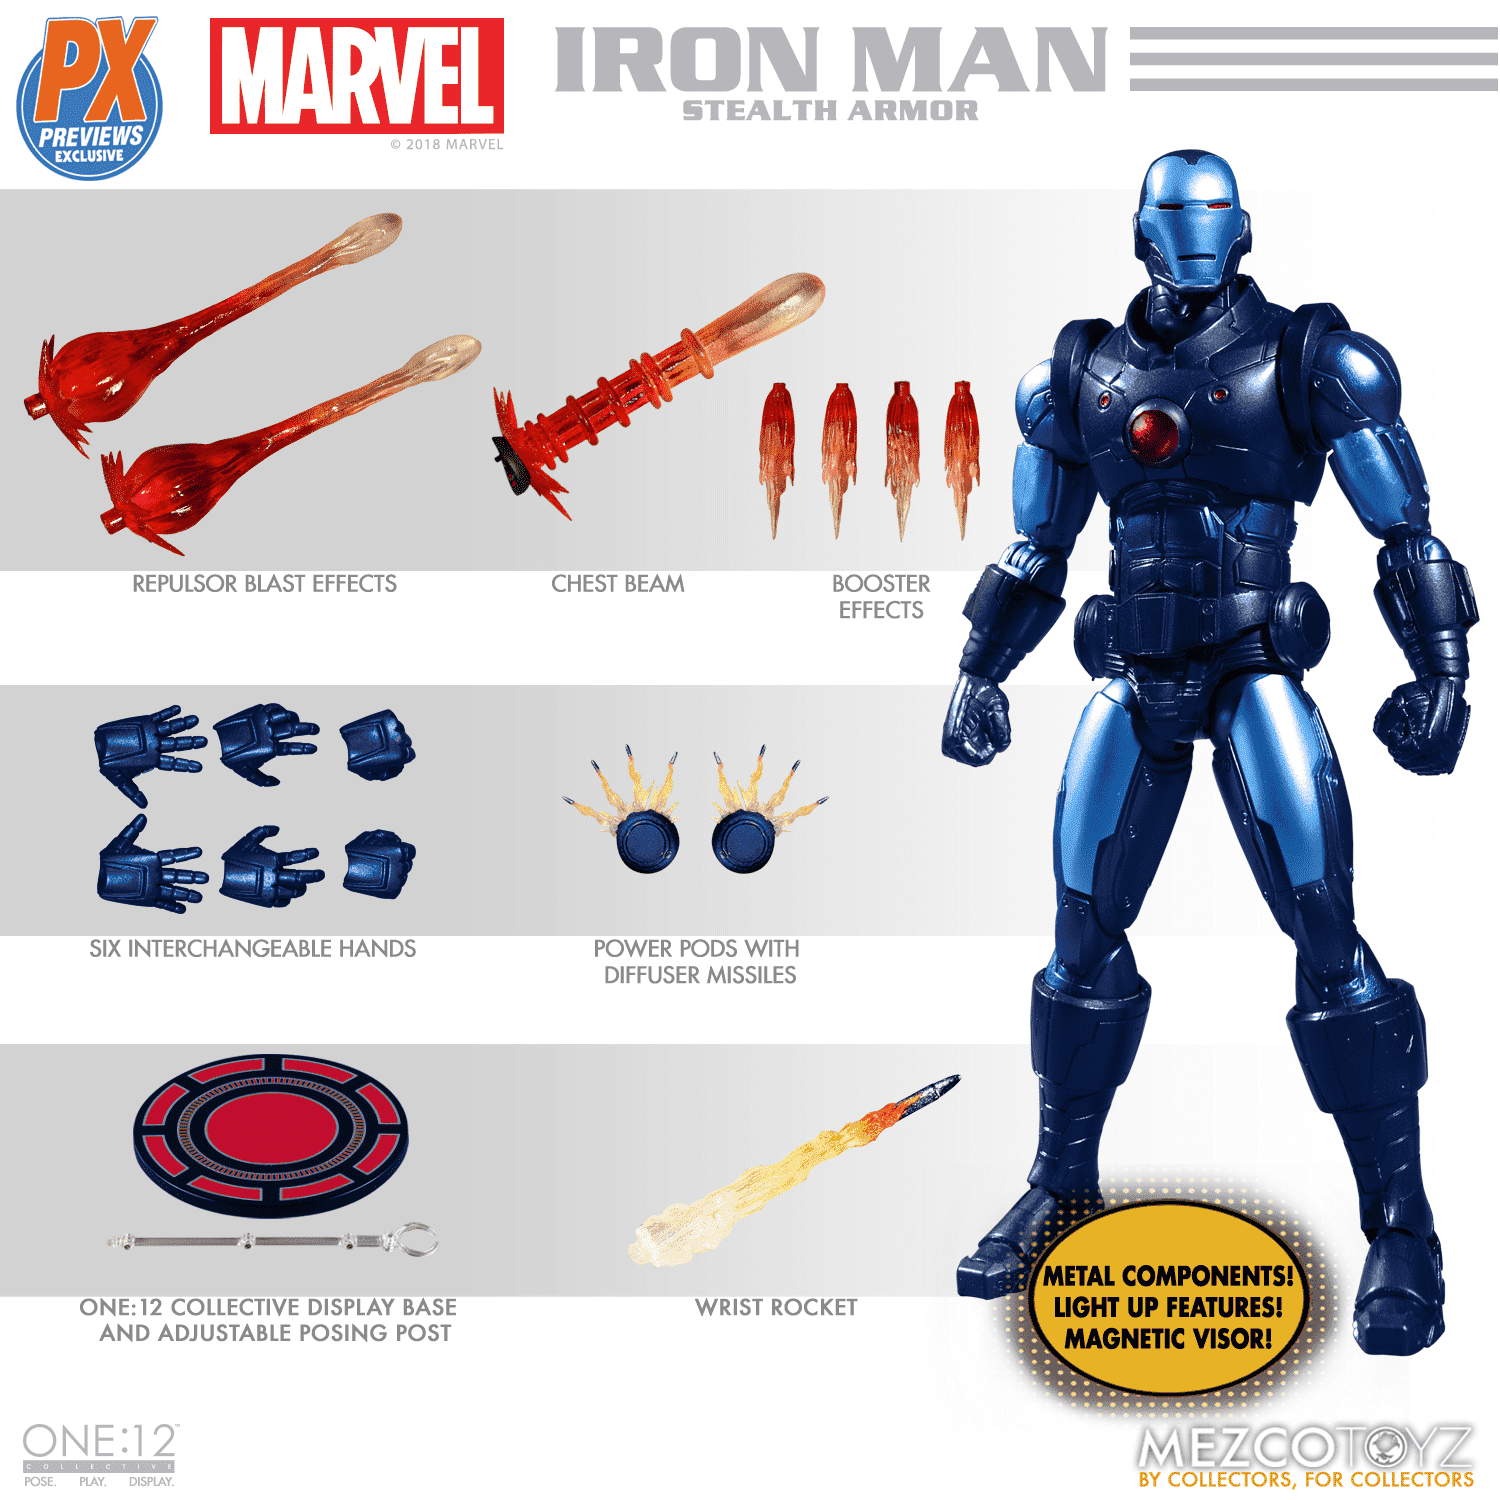 Image of ONE:12 Collective Marvel Px Iron Man Stealth Armor